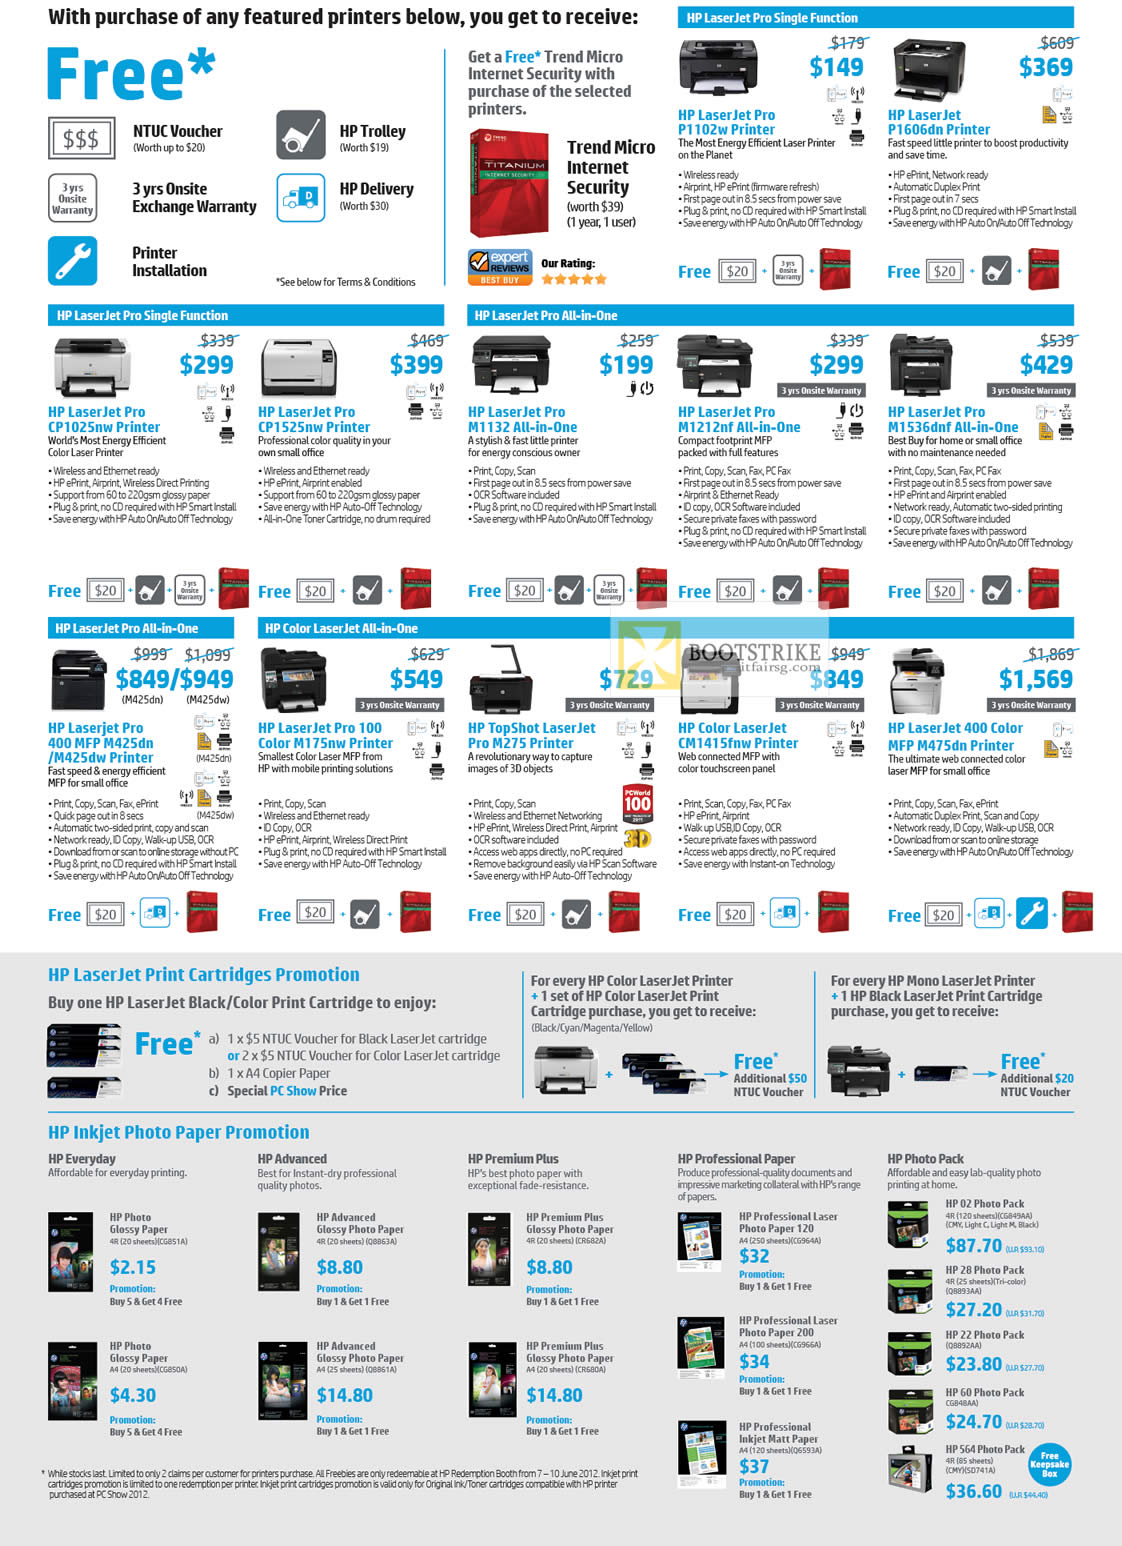 PC SHOW 2012 price list image brochure of HP Printers Laser Laserjet Pro CP1025nw, CP1525nw, M1132, M1212nf, M1536dnf, 400 MFP M475dn, M1415fnw, 100 M175nw, TopShot M275, 400 MFP M425dn M425dw